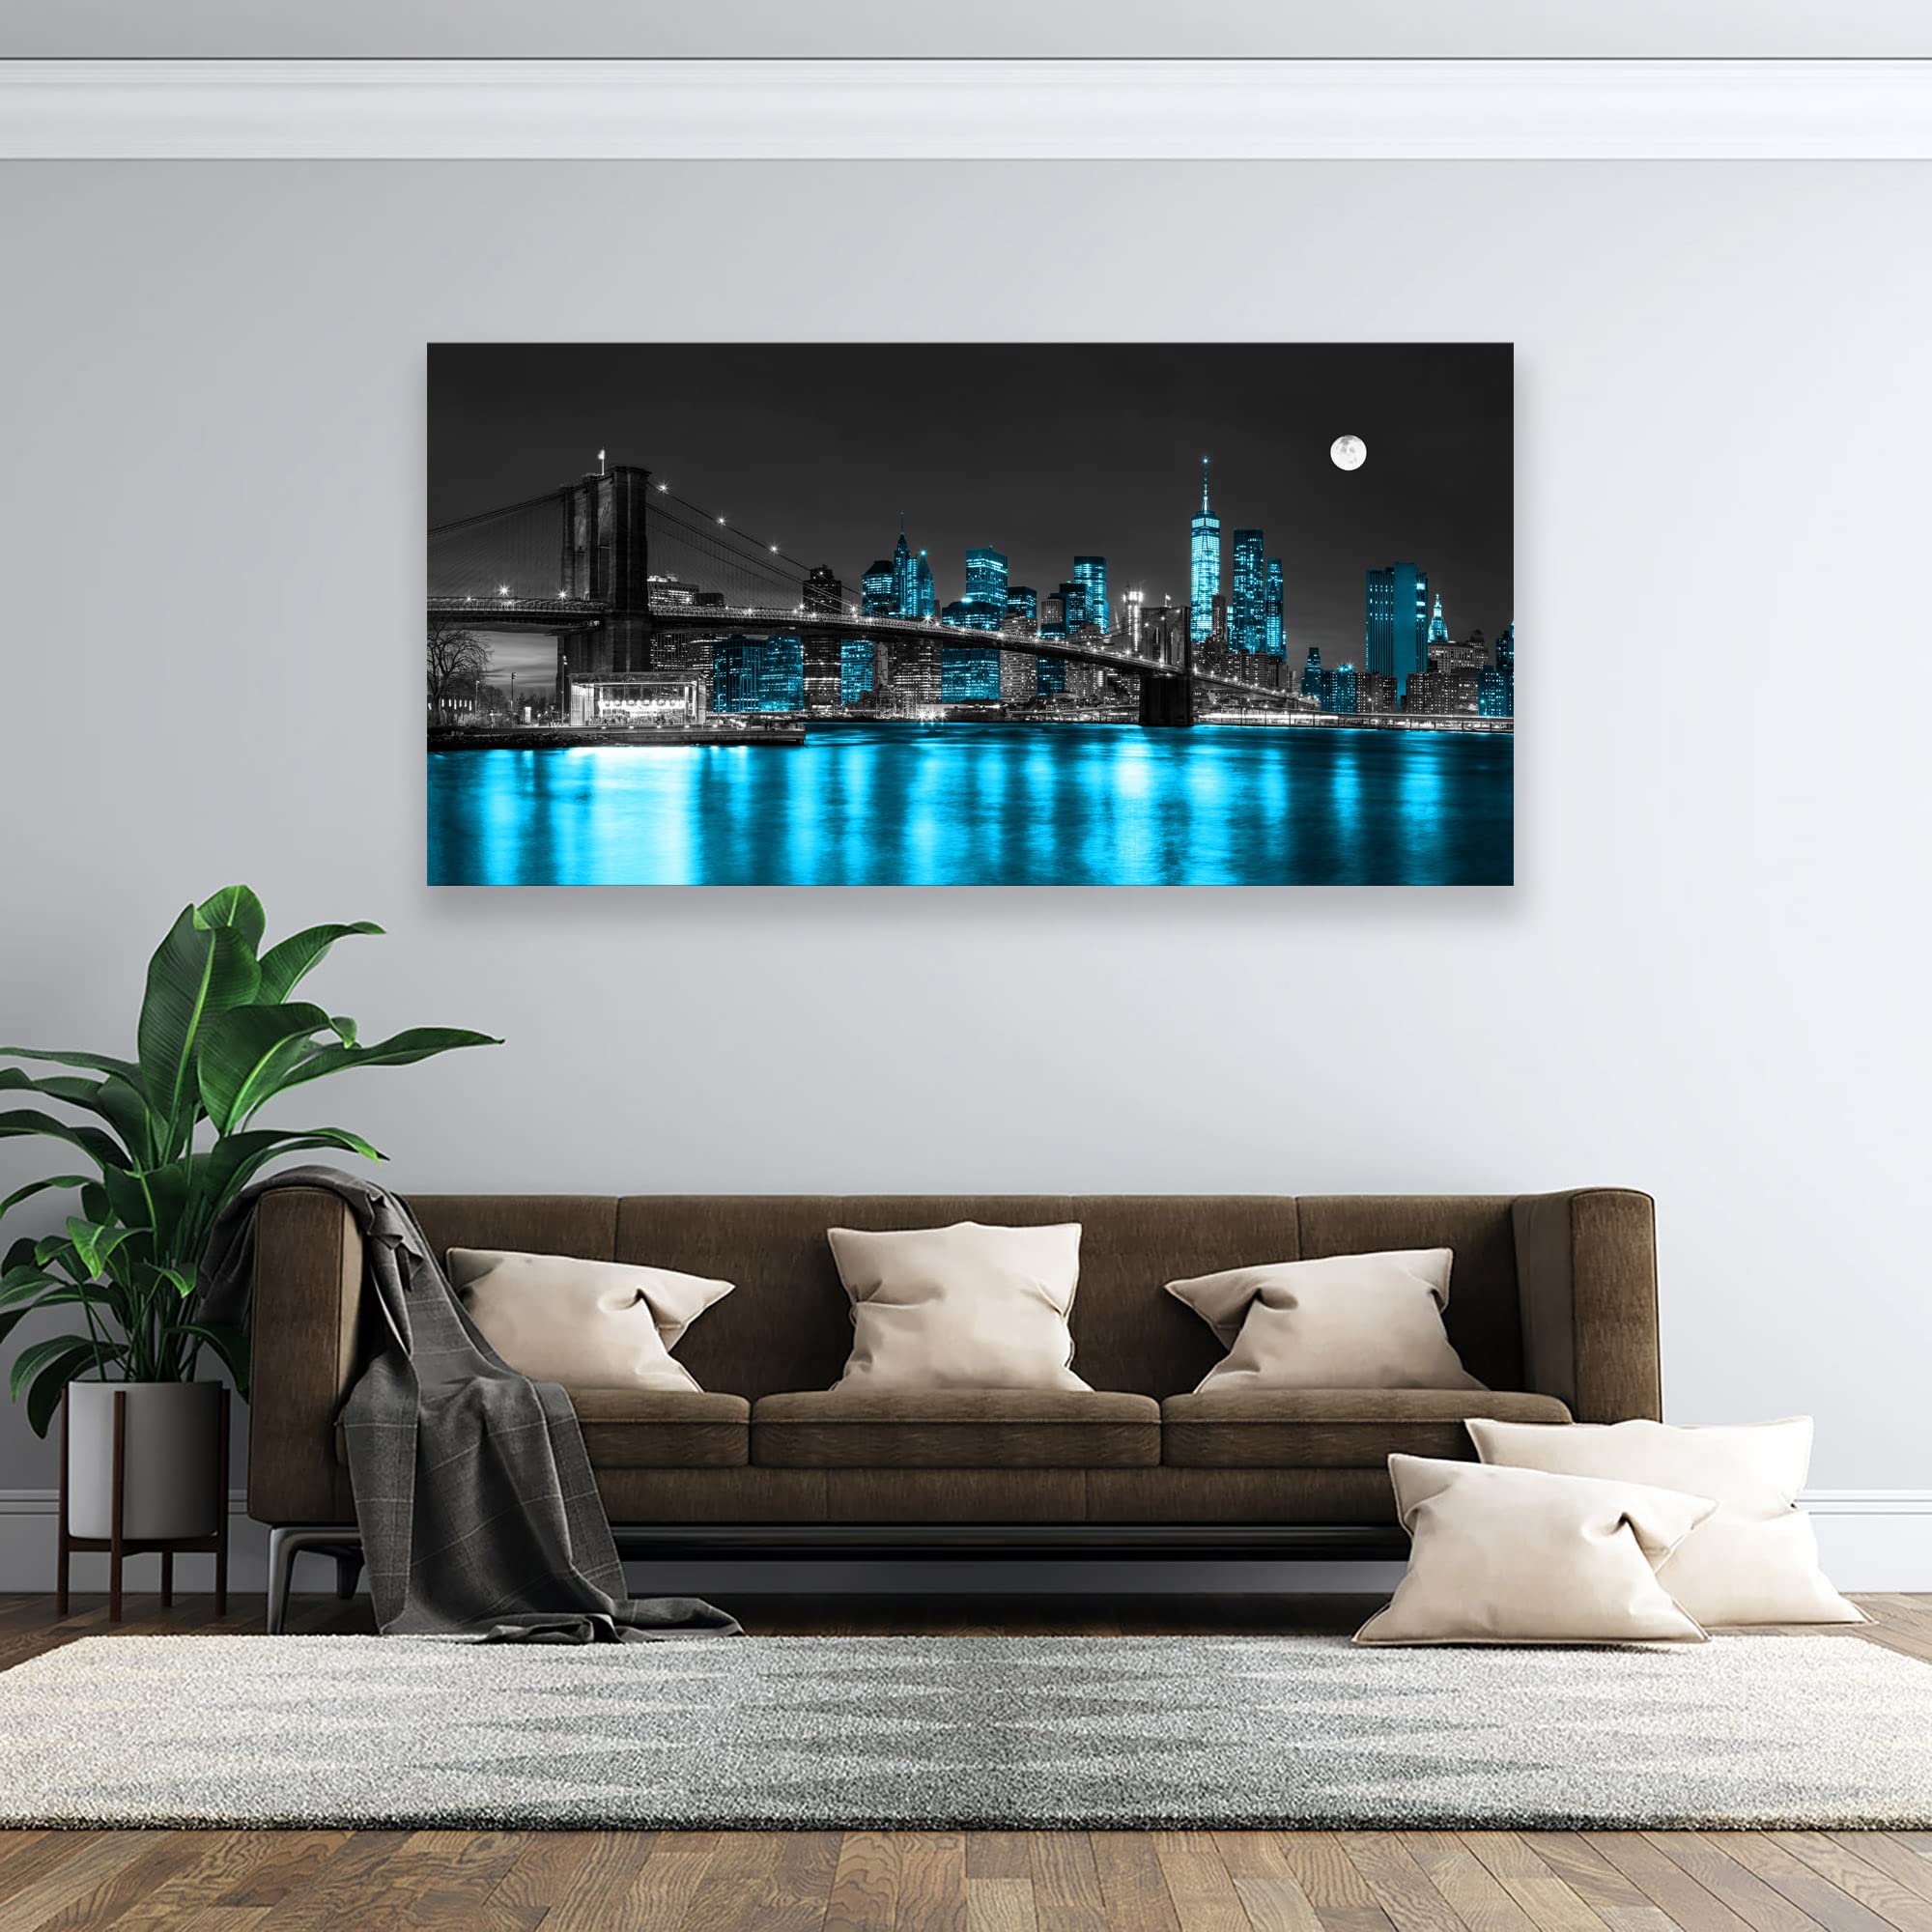 Aibonnly Wall Art Canvas Painting Black White and Blue New York Brooklyn Bridge 1 Piece Cityscape Night Building Skyline Picture Poster Print Framed for Living Room Bedroom Kitchen Office Home Decor